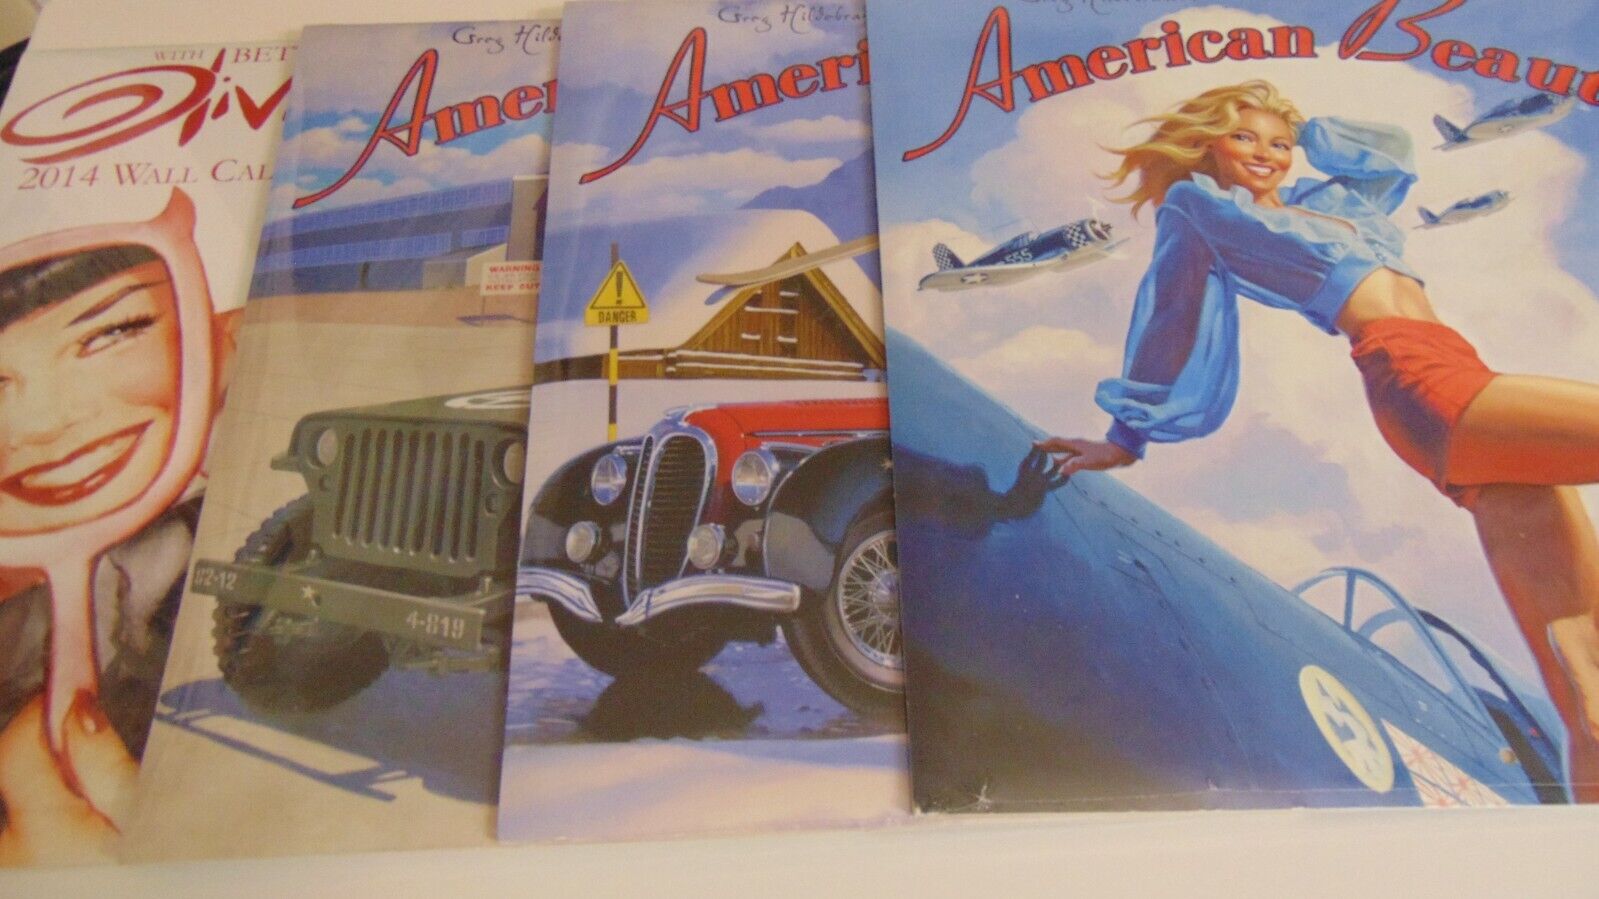 AMERICAN BEAUTIES 12x12 CALENDAR -SEALED Lot 2015 2016 2017 + Oliva 2014 PAGE